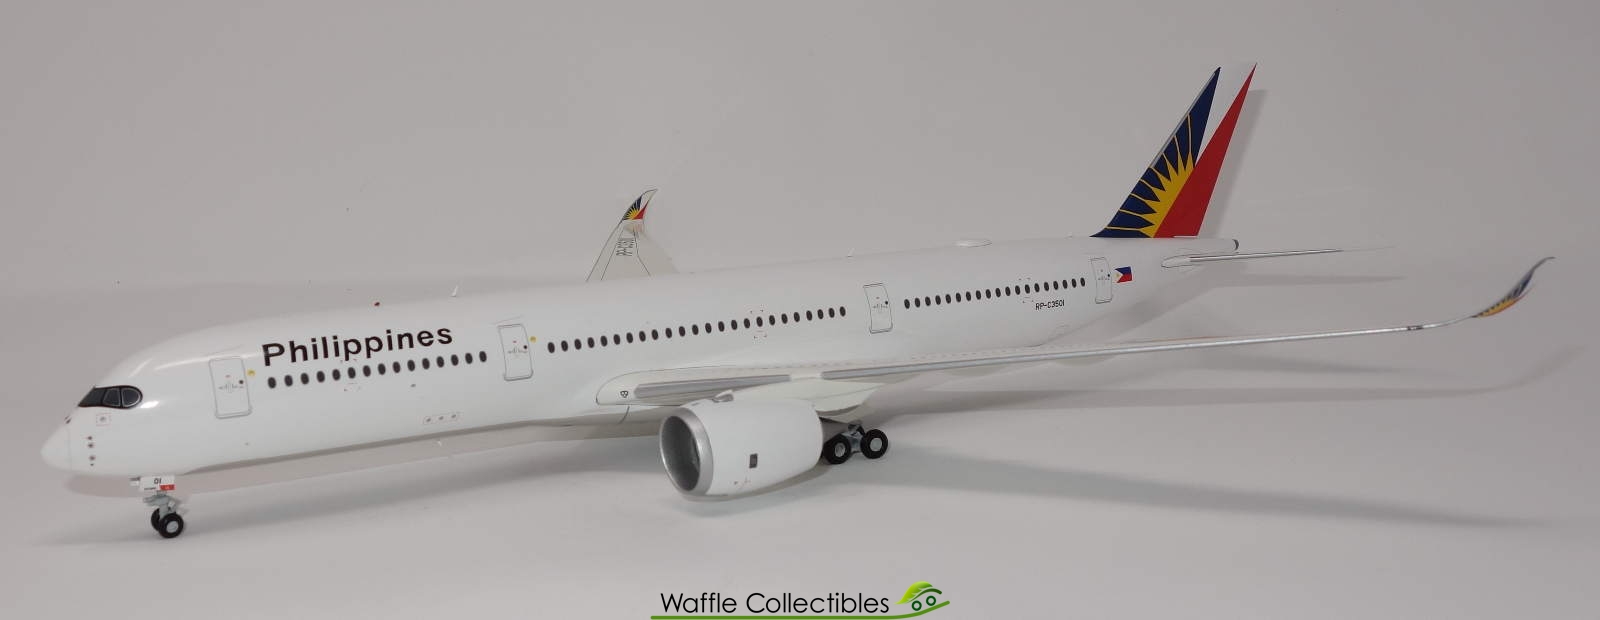 Gemini200 Philippine Airlines A350-900 1:200 Scale Diecast Model Airplane 